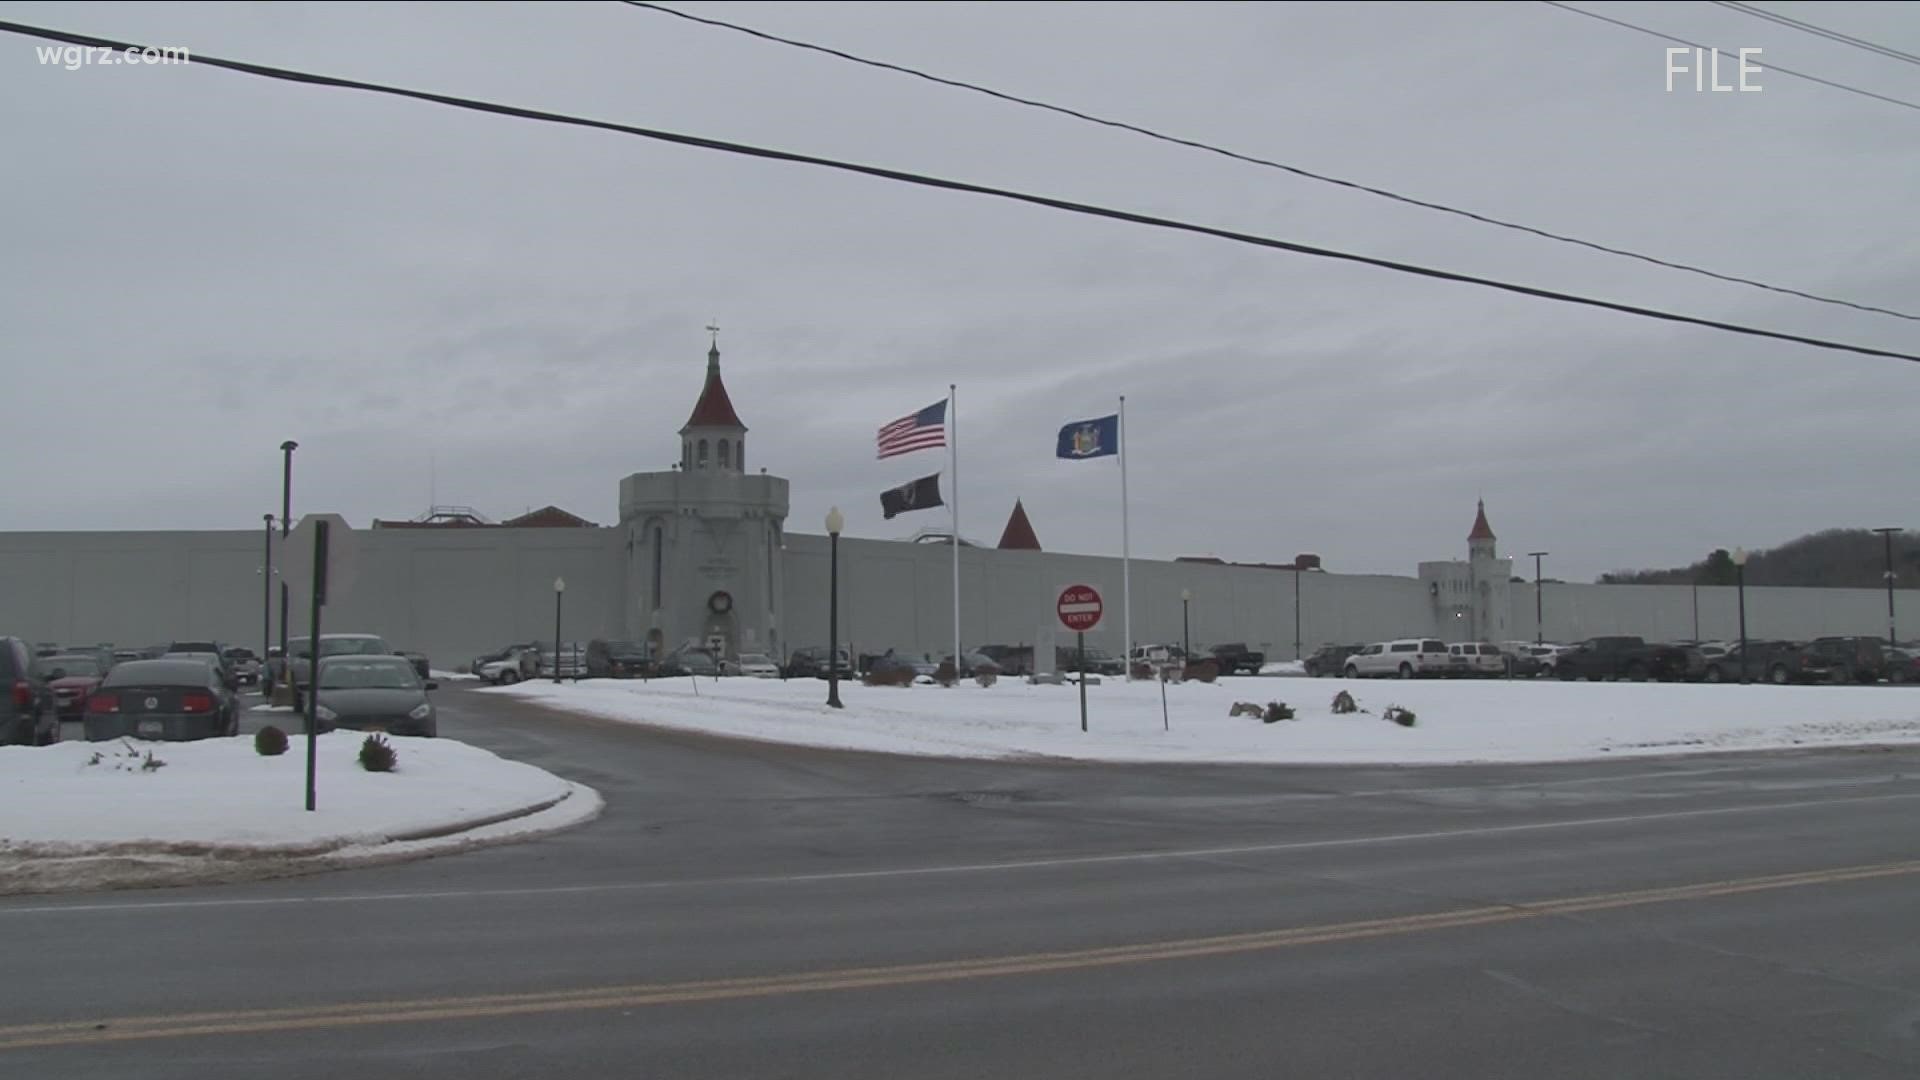 Seven officers are recovering tonight after an inmate at Attica Correctional Facility set fire in his cell.